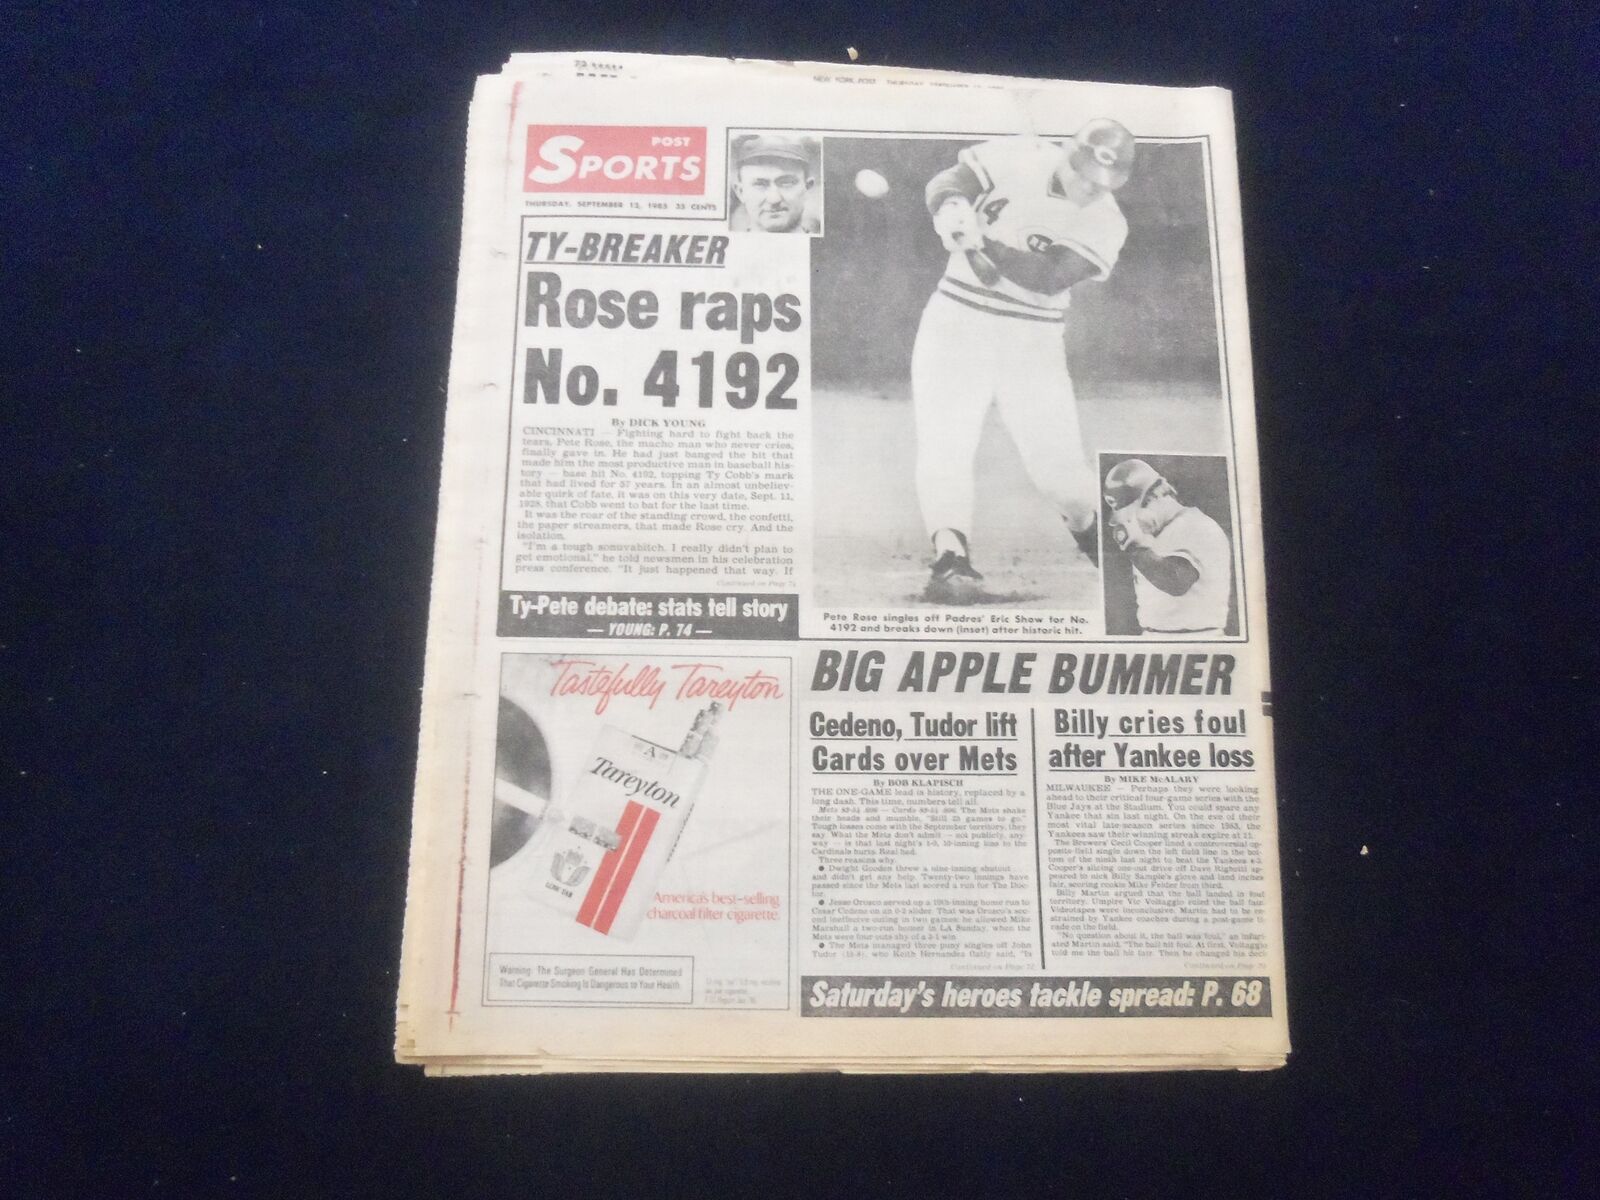 1985 SEP 12 NEW YORK POST NEWSPAPER - PETE ROSE GETS RECORD HIT #4192 - NP 6068